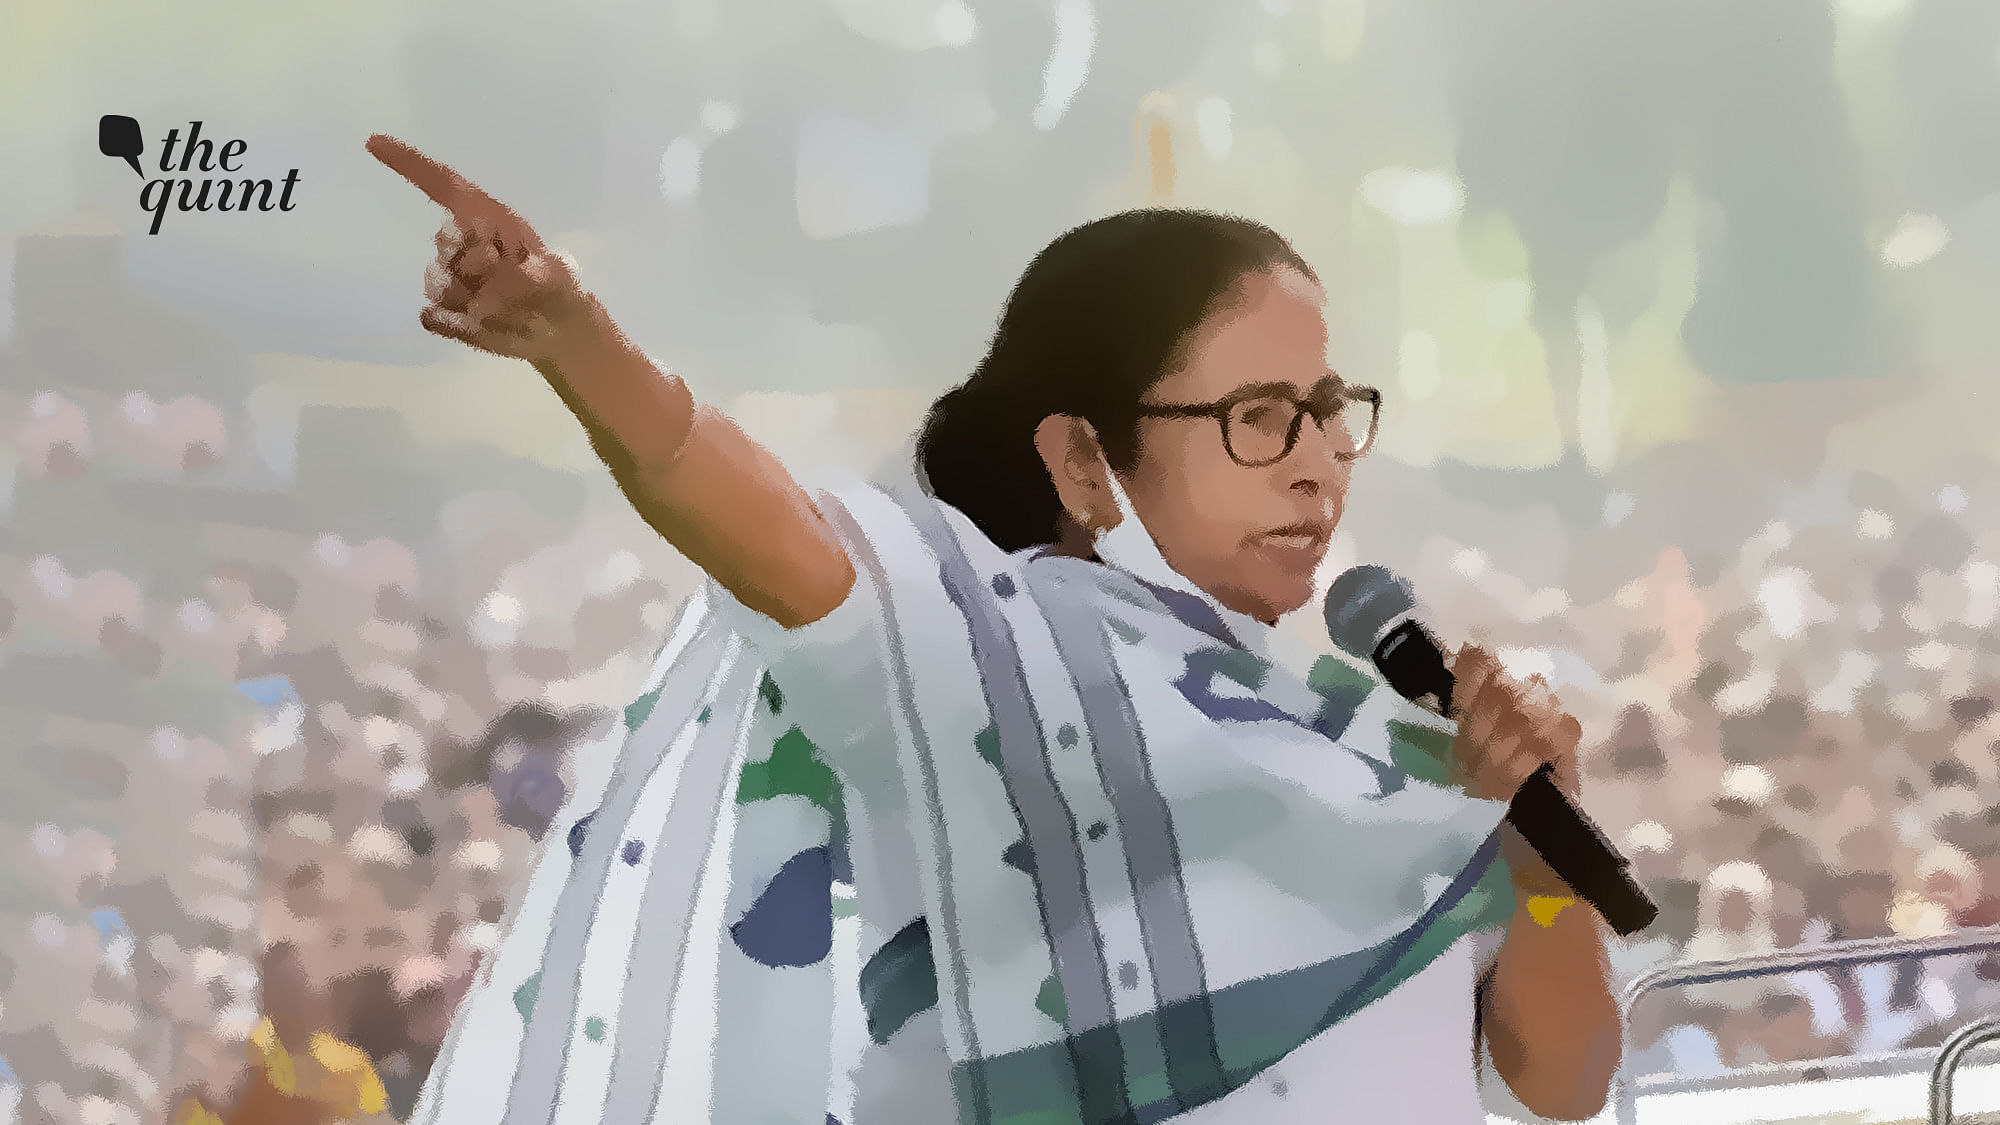 <div class="paragraphs"><p>West Bengal Chief Minister and Trinamool Congress (TMC) supremo Mamata Banerjee will visit Delhi from 26-29 July. She is scheduled to meet PM Modi during the visit.</p></div>